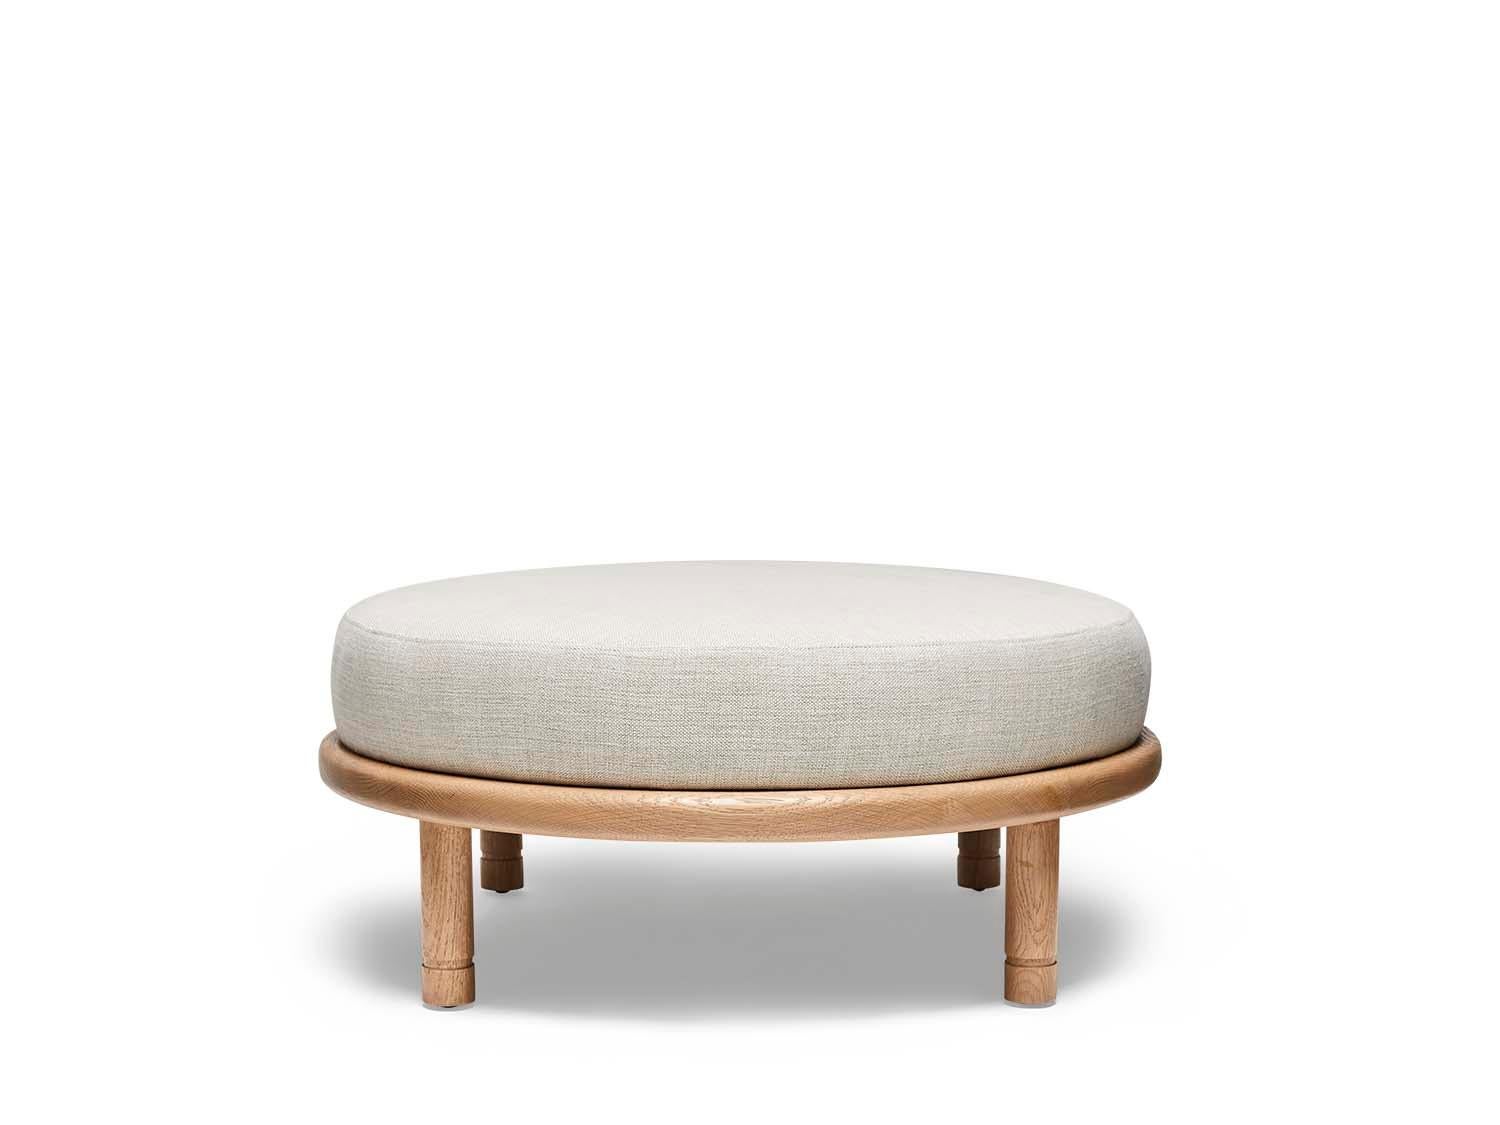 Oak and linen Moreno Ottoman by Lawson-Fenning. The Moreno Ottoman features a round solid wood base with four cylindrical legs and an upholstered top. Available in American walnut or white oak. 

The Lawson-Fenning Collection is designed and